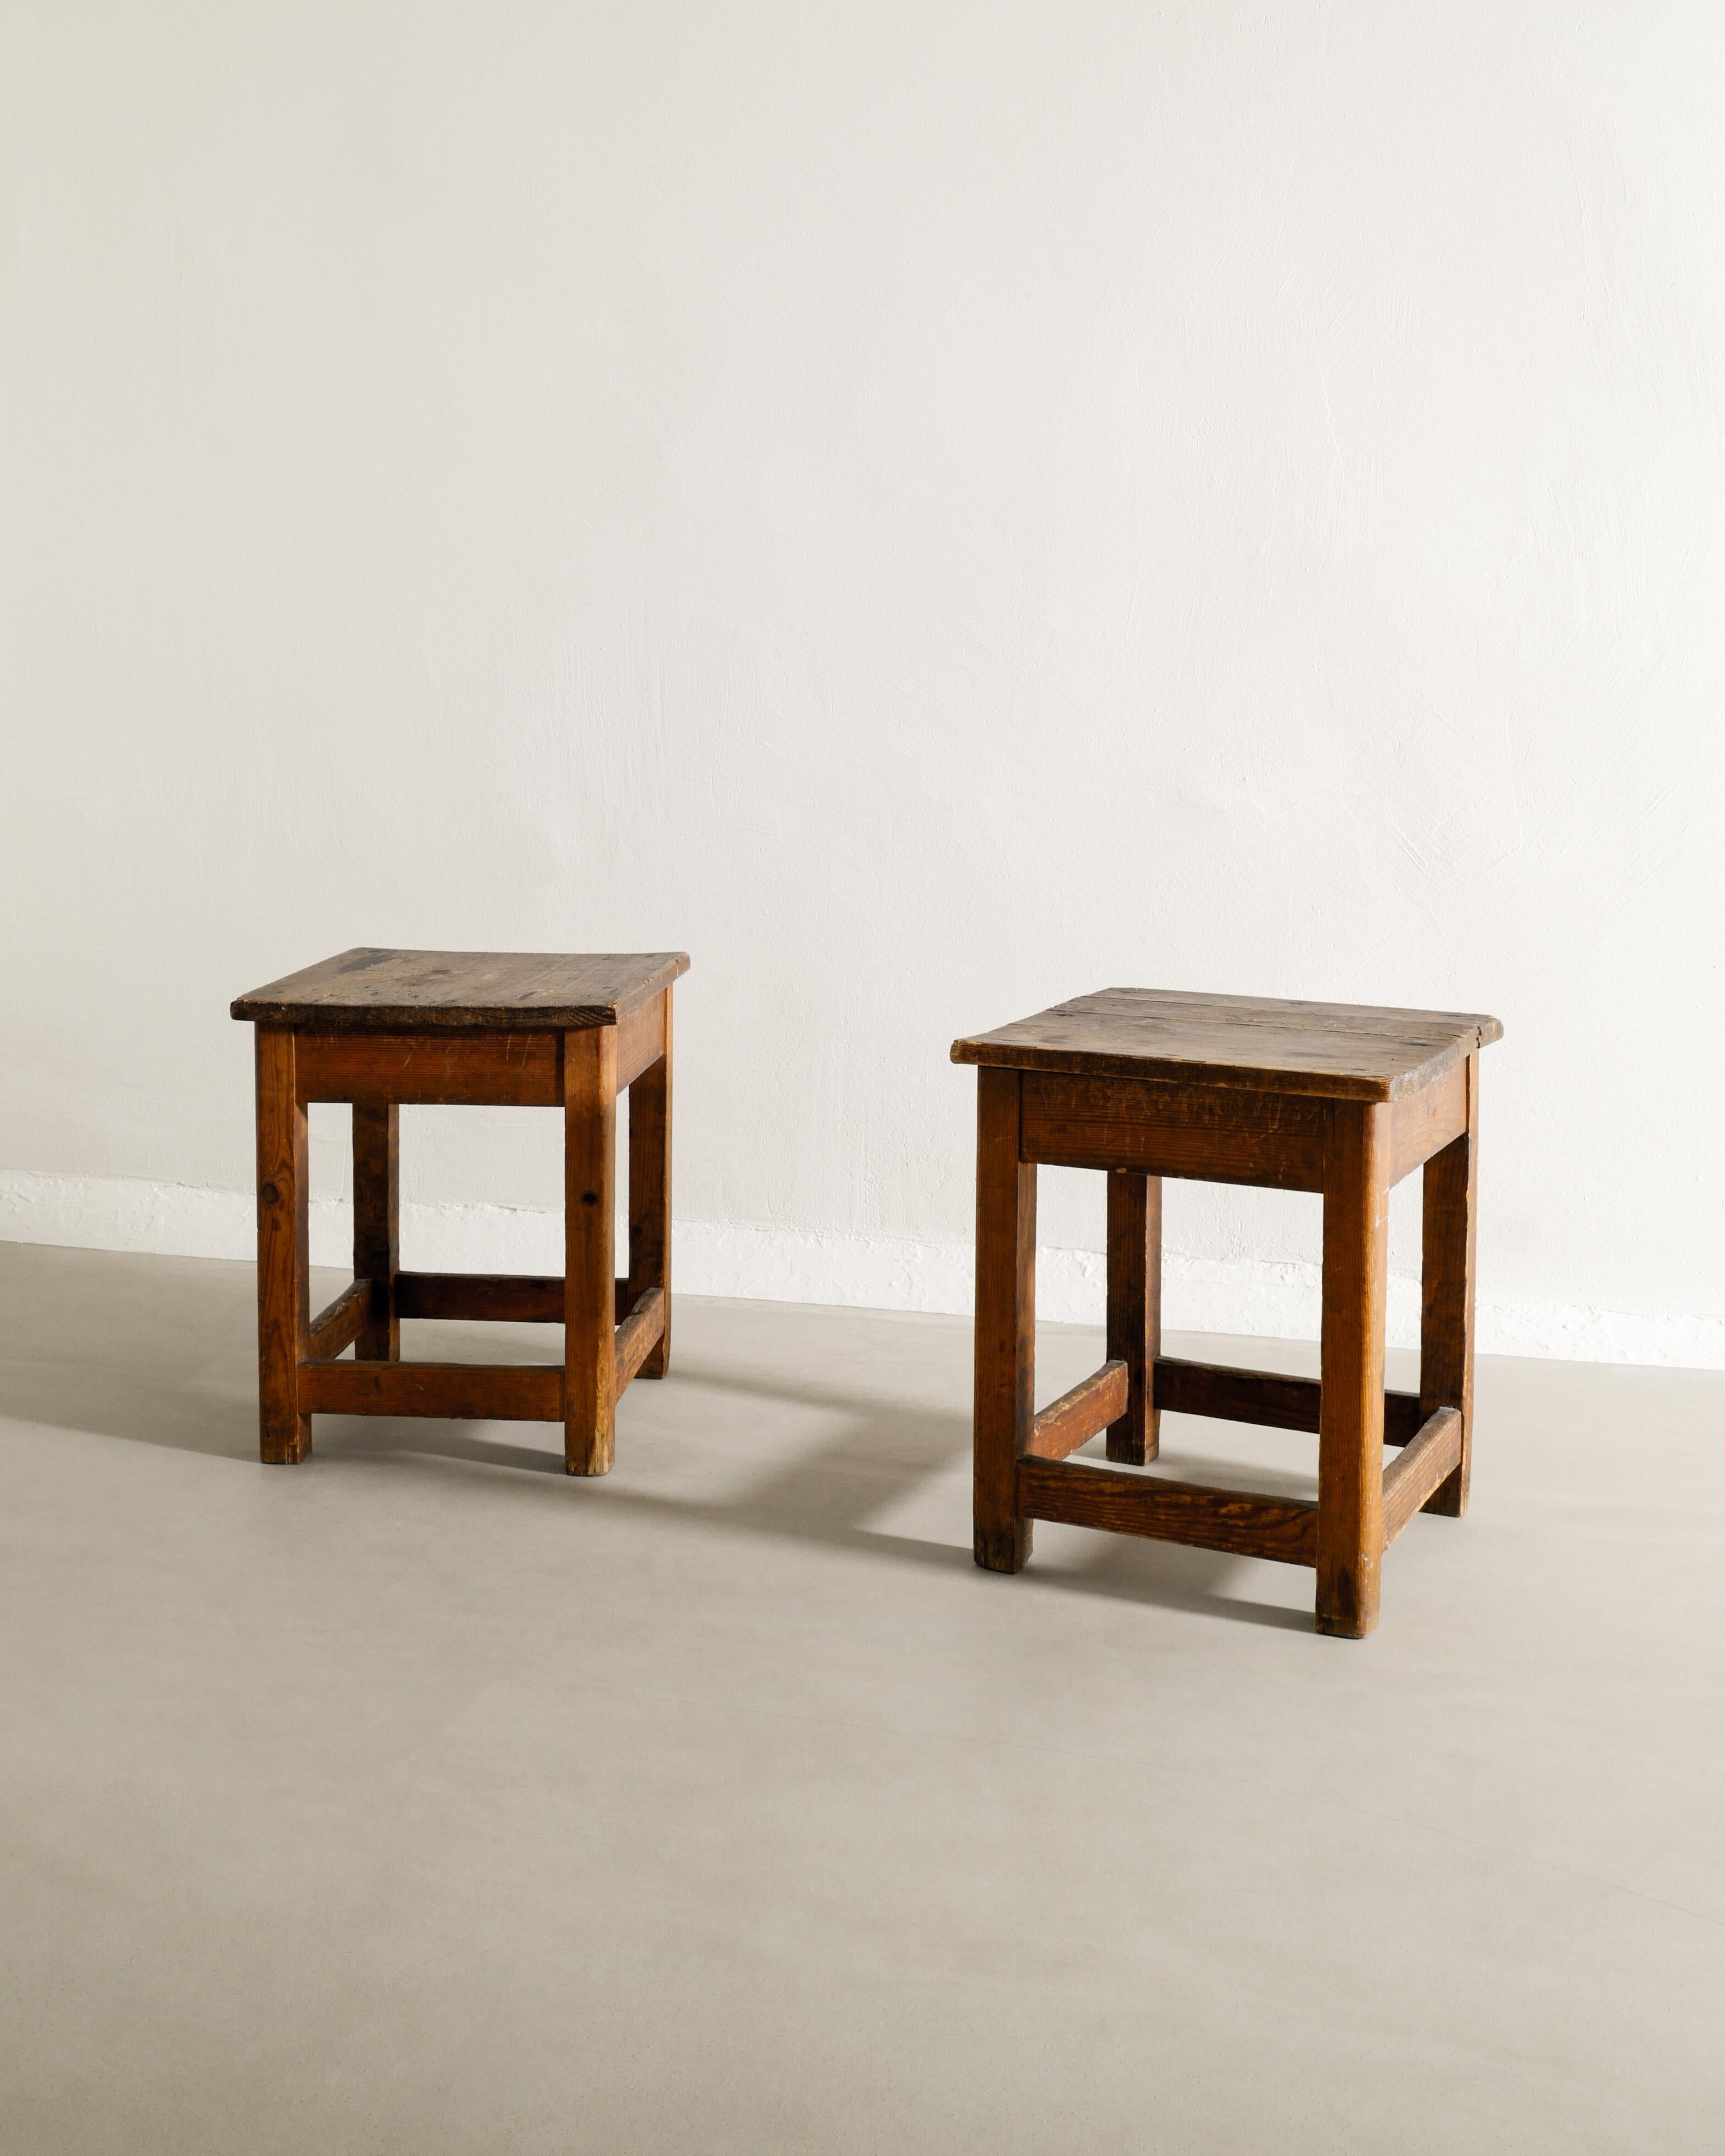 Scandinavian Modern Pair of Rustic Wooden Swedish Bed Side Tables in Pine Produced Early, 1900s For Sale